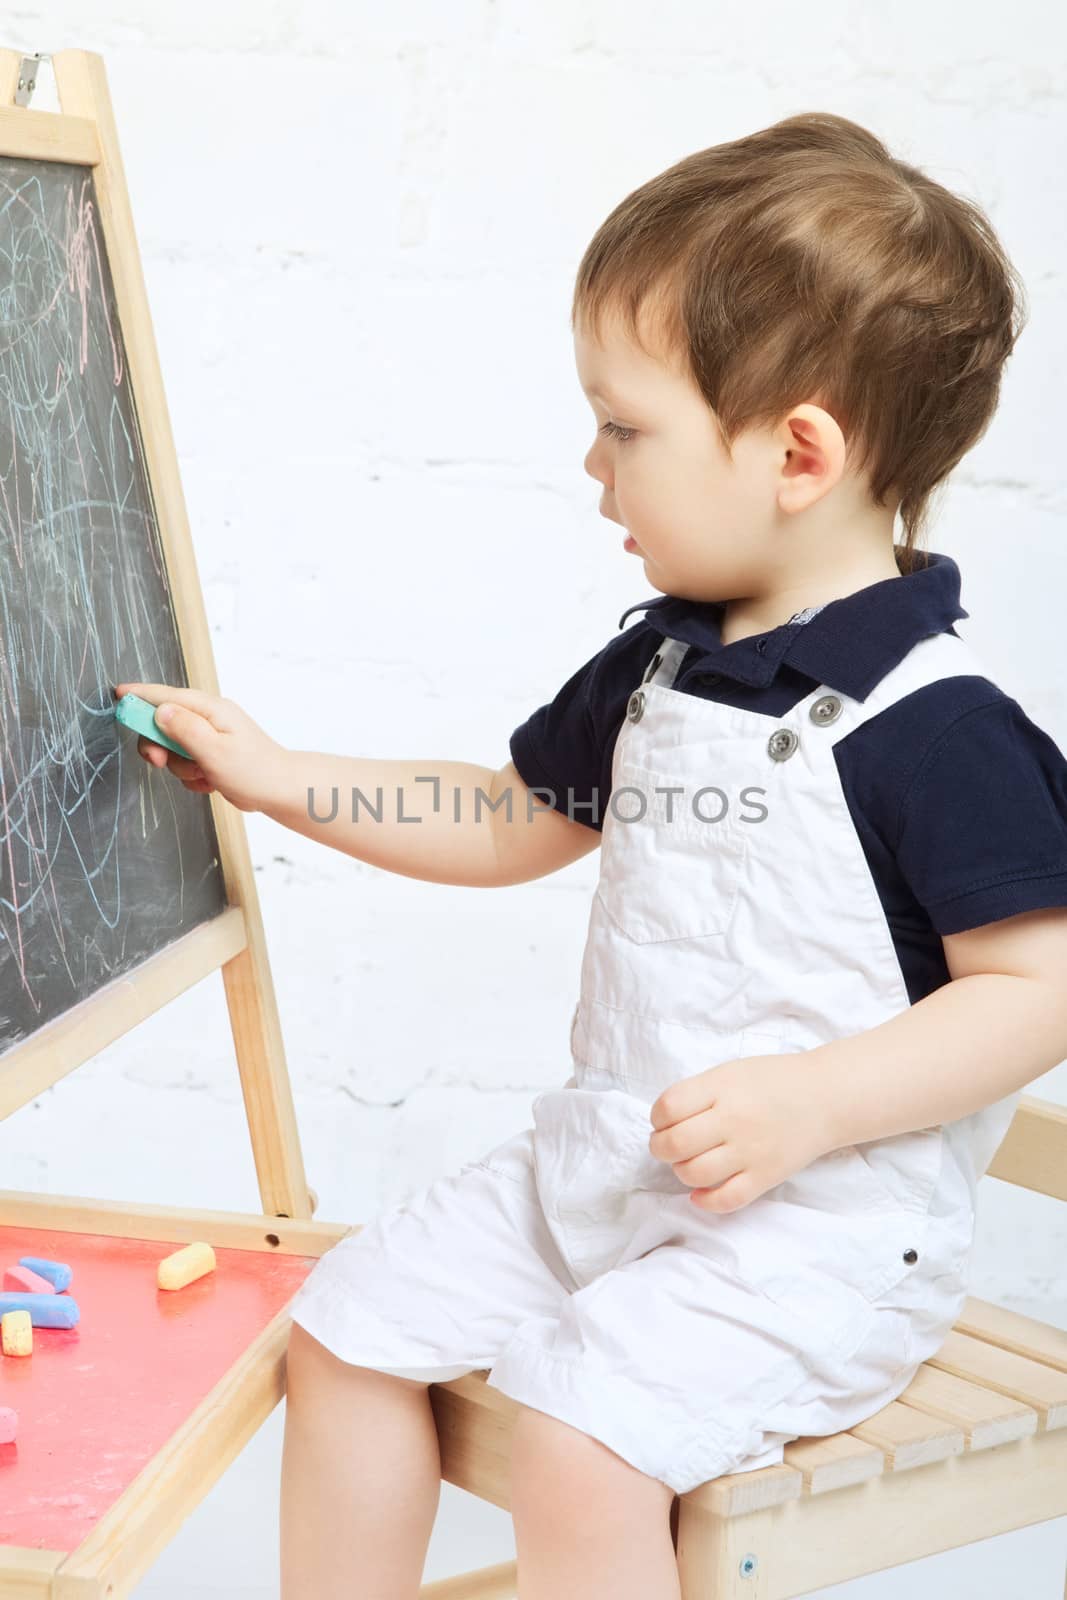 Child Drawing With Chalk by petr_malyshev